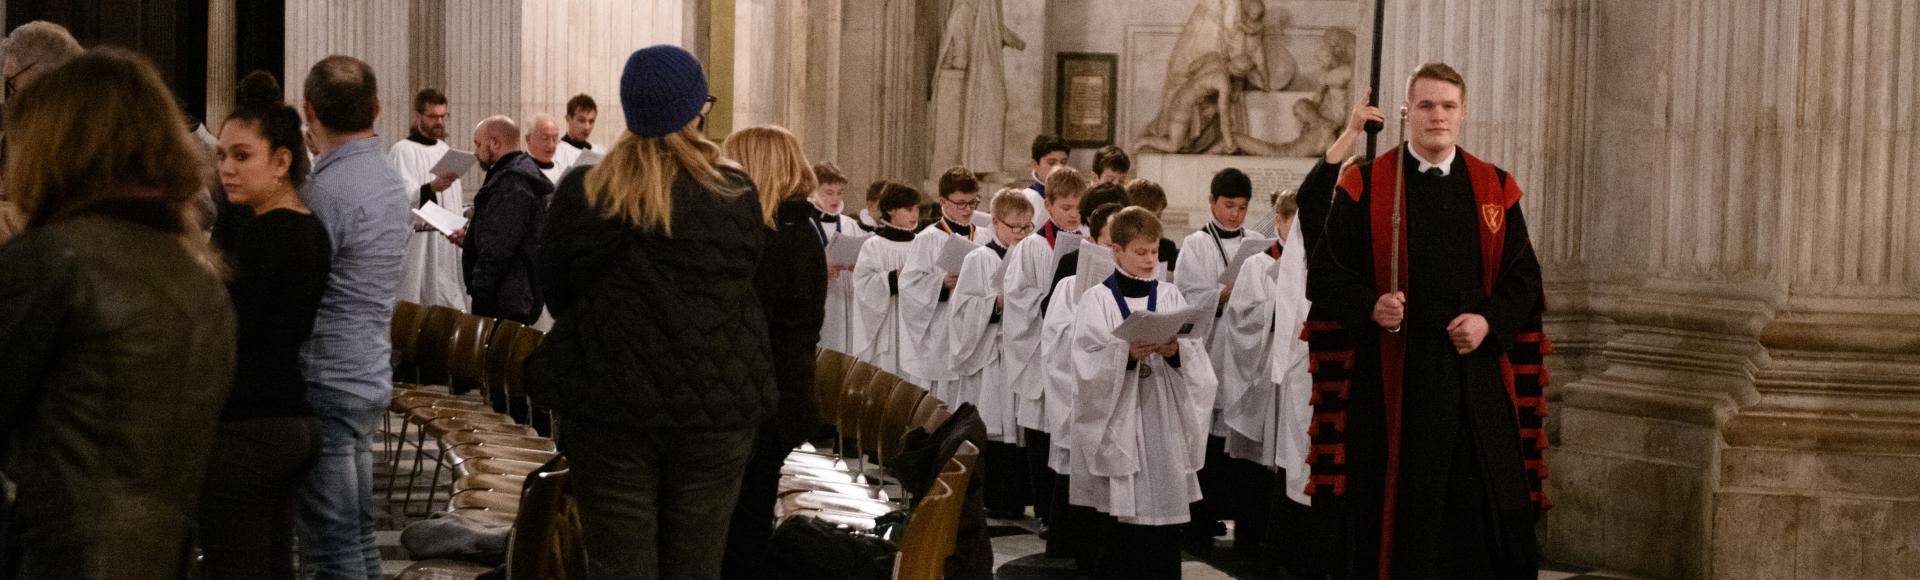 Choristers processing in the Cathedral